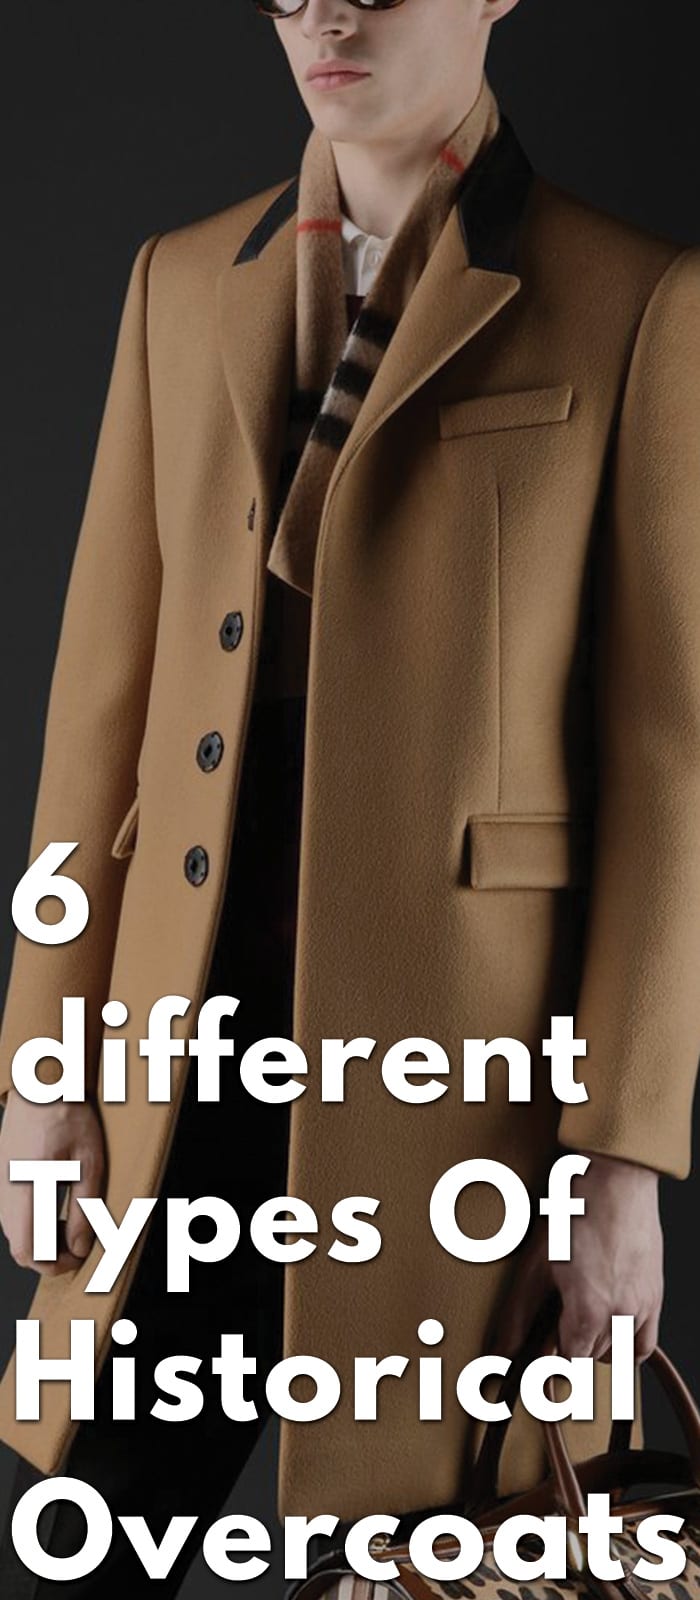 6-different-Types-Of-Historical-Overcoats